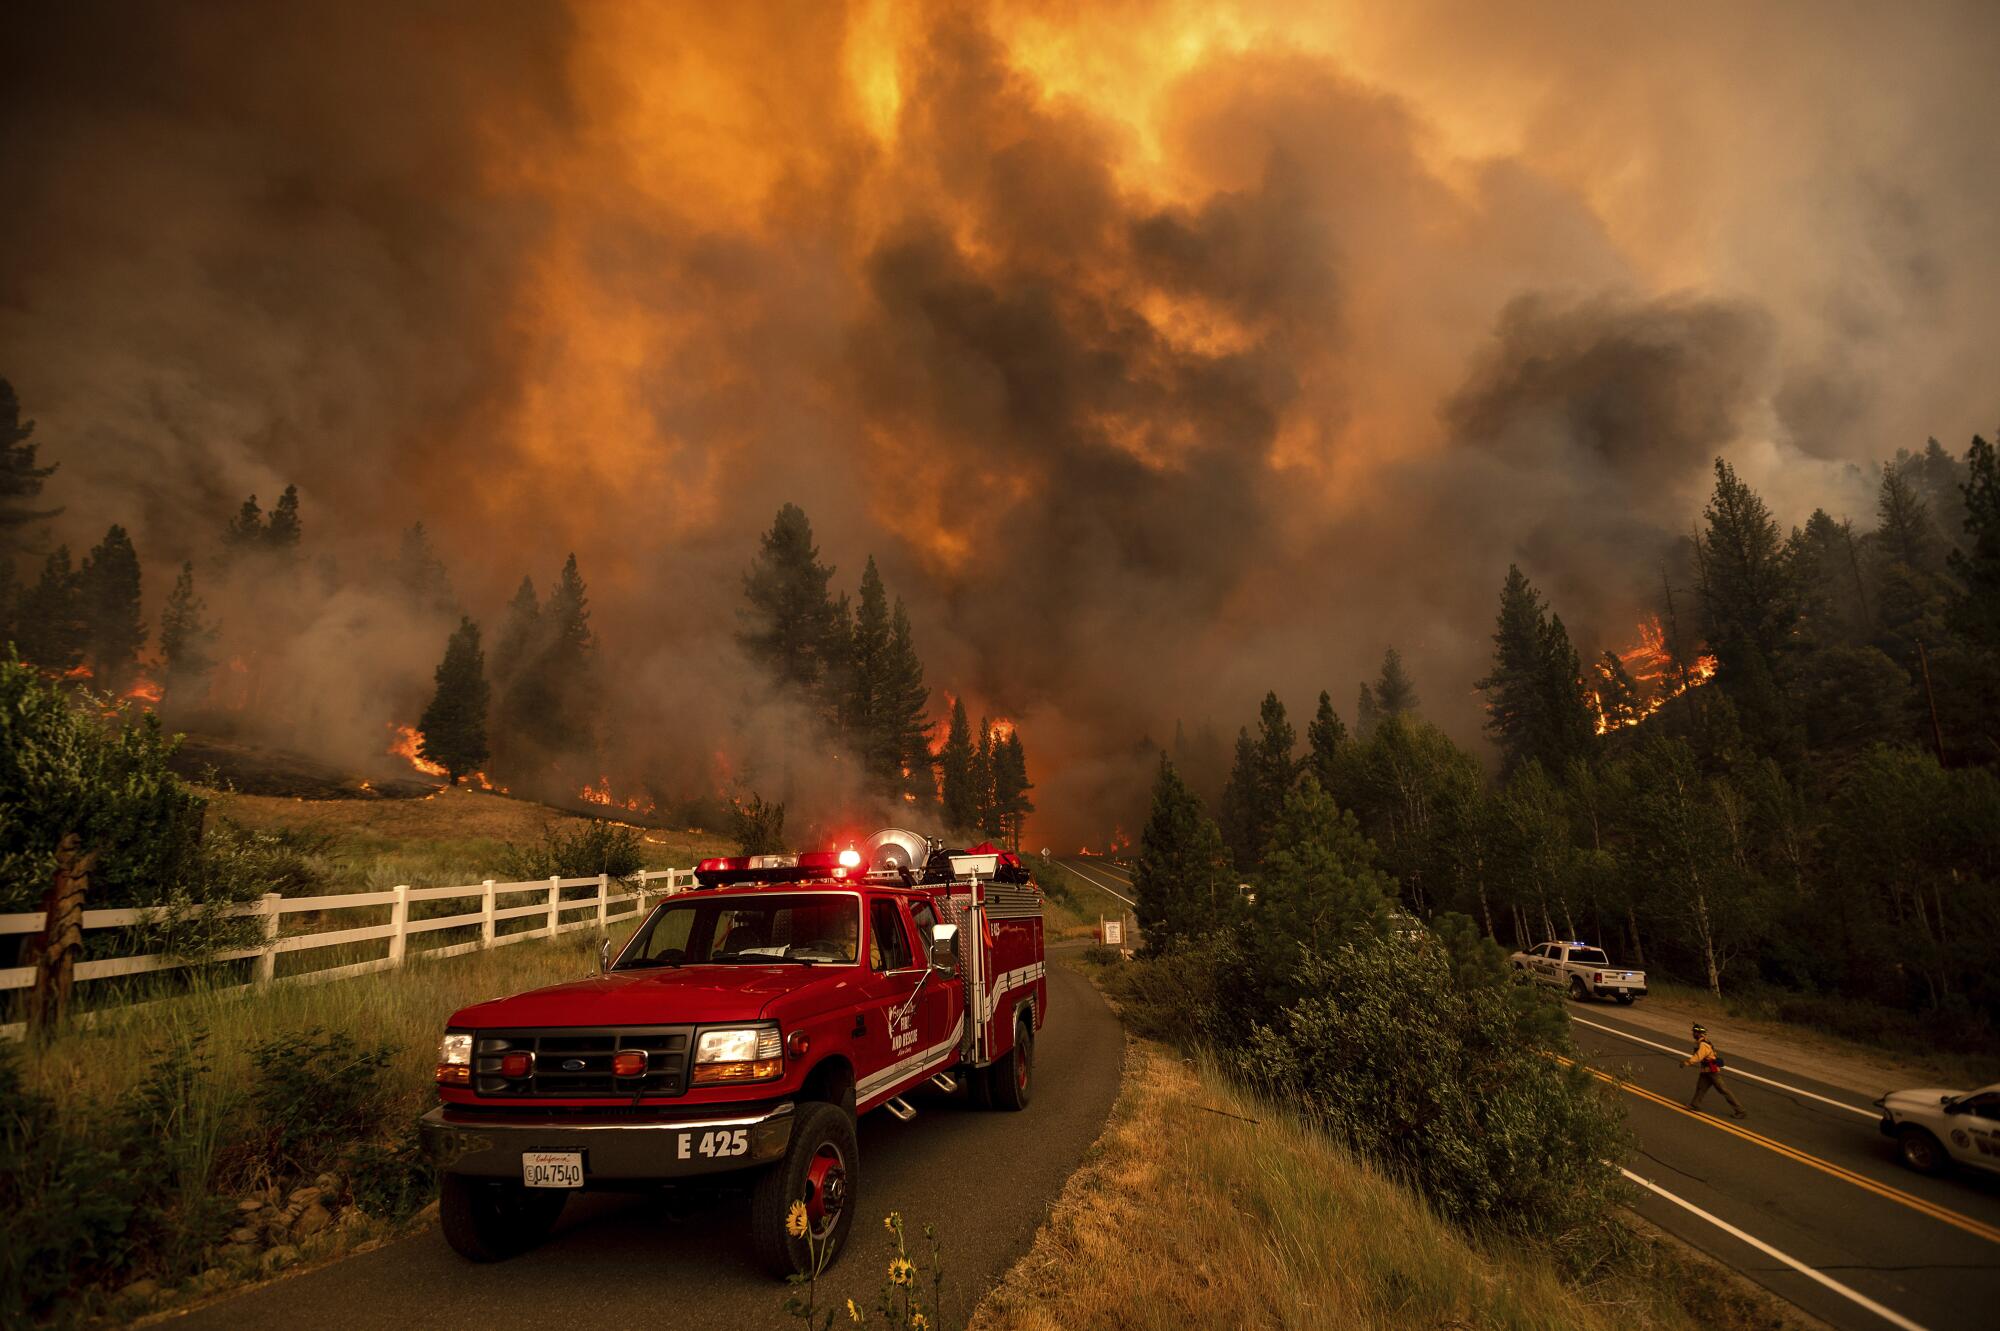 Firefighters battle the Tamarack fire in the community of Markleeville in Alpine County, Calif.